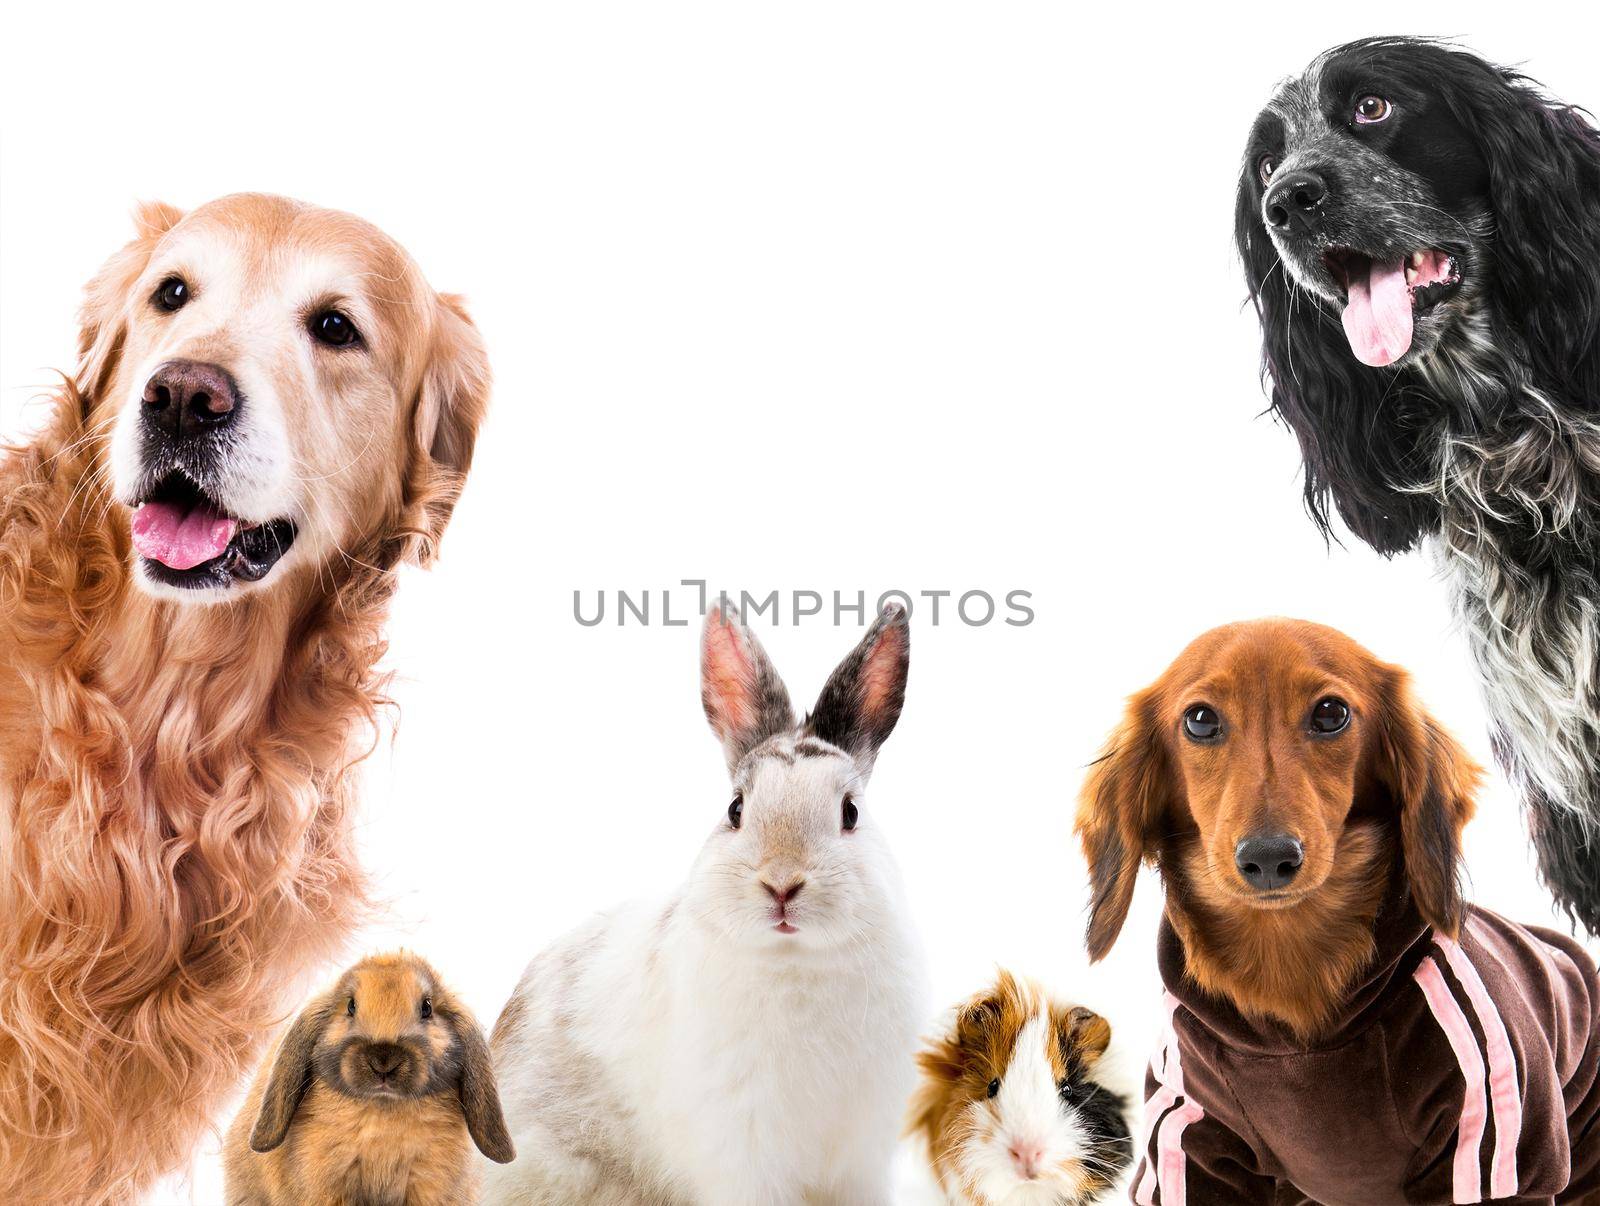 Group of cute fluffy animals looking on camera isolated on white background